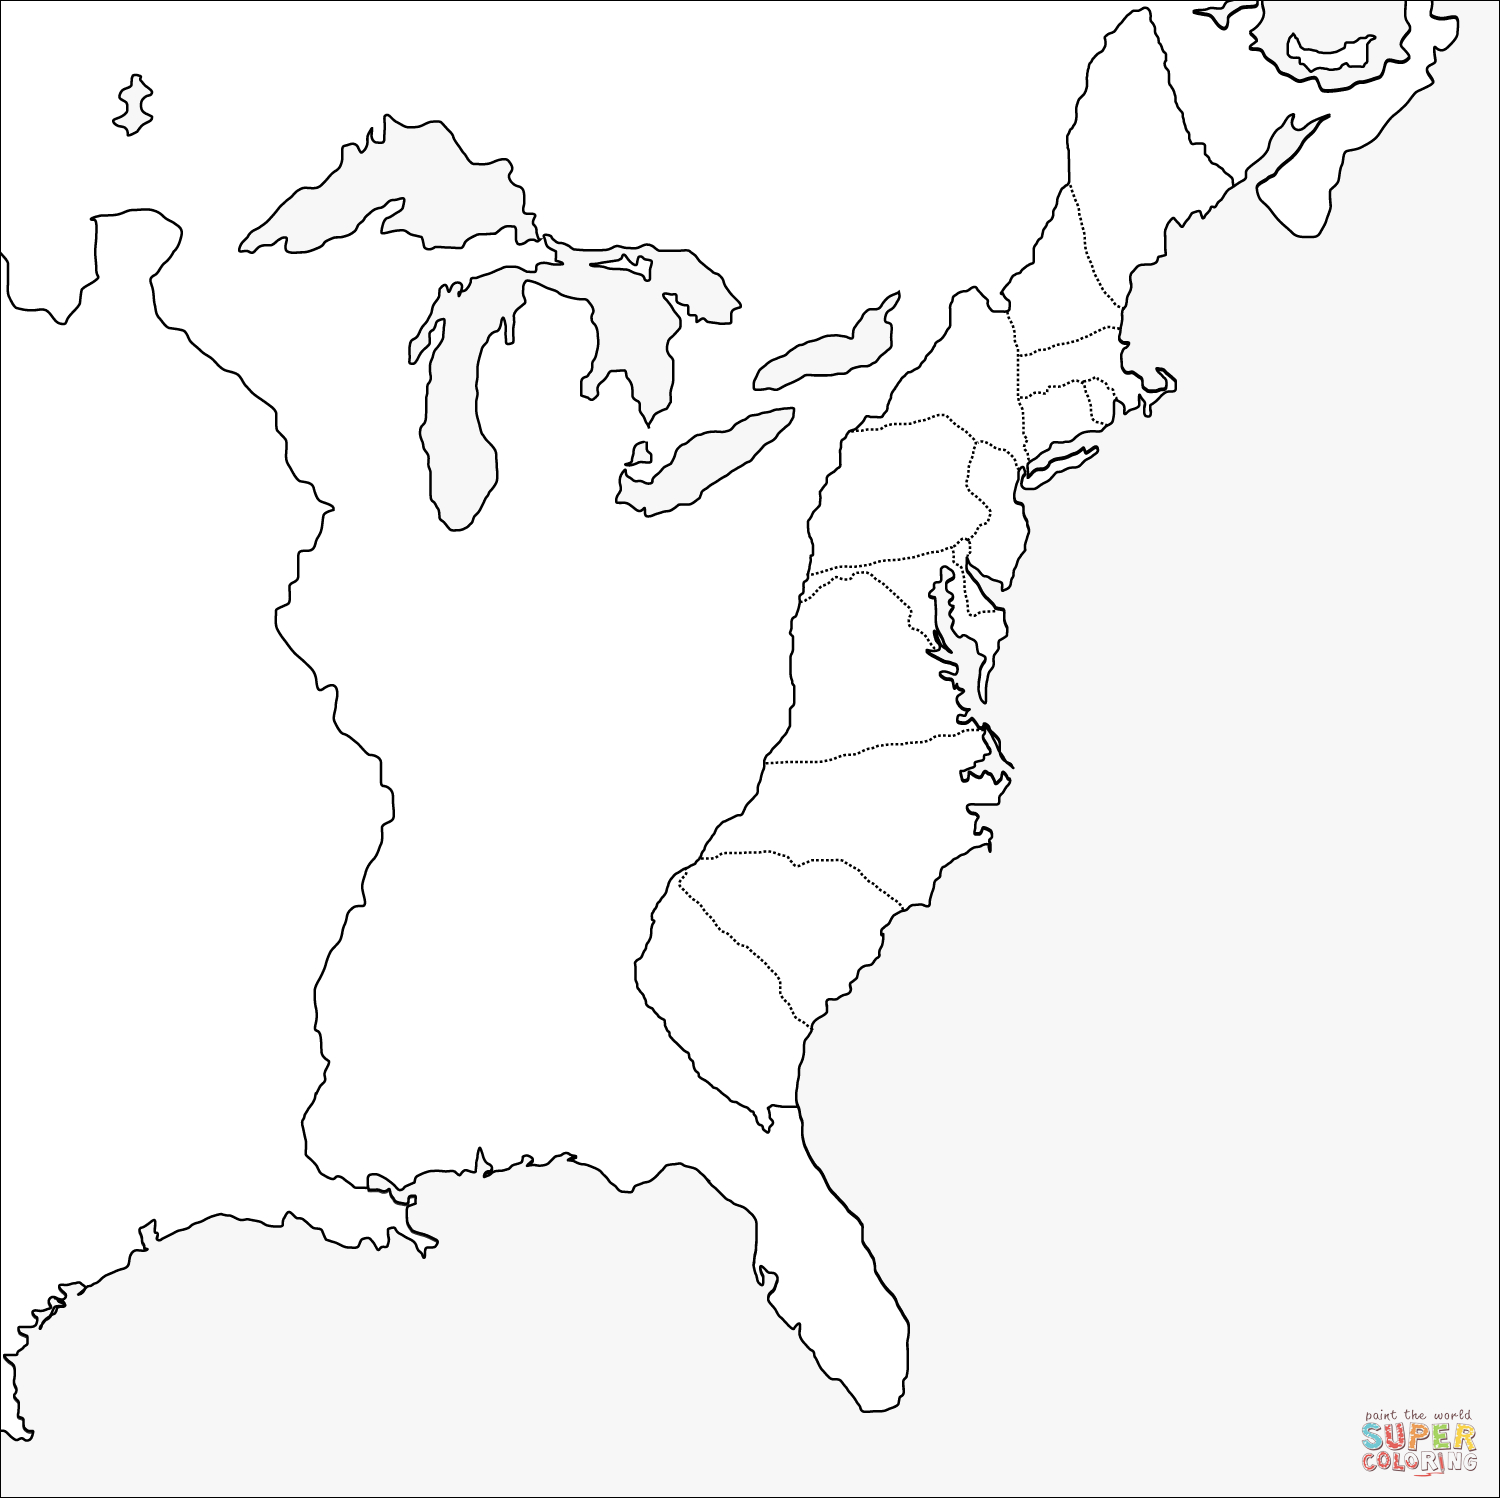 Thirteen Colonies Blank Map Coloring Page | Free Printable Coloring - 13 Colonies Blank Map Printable